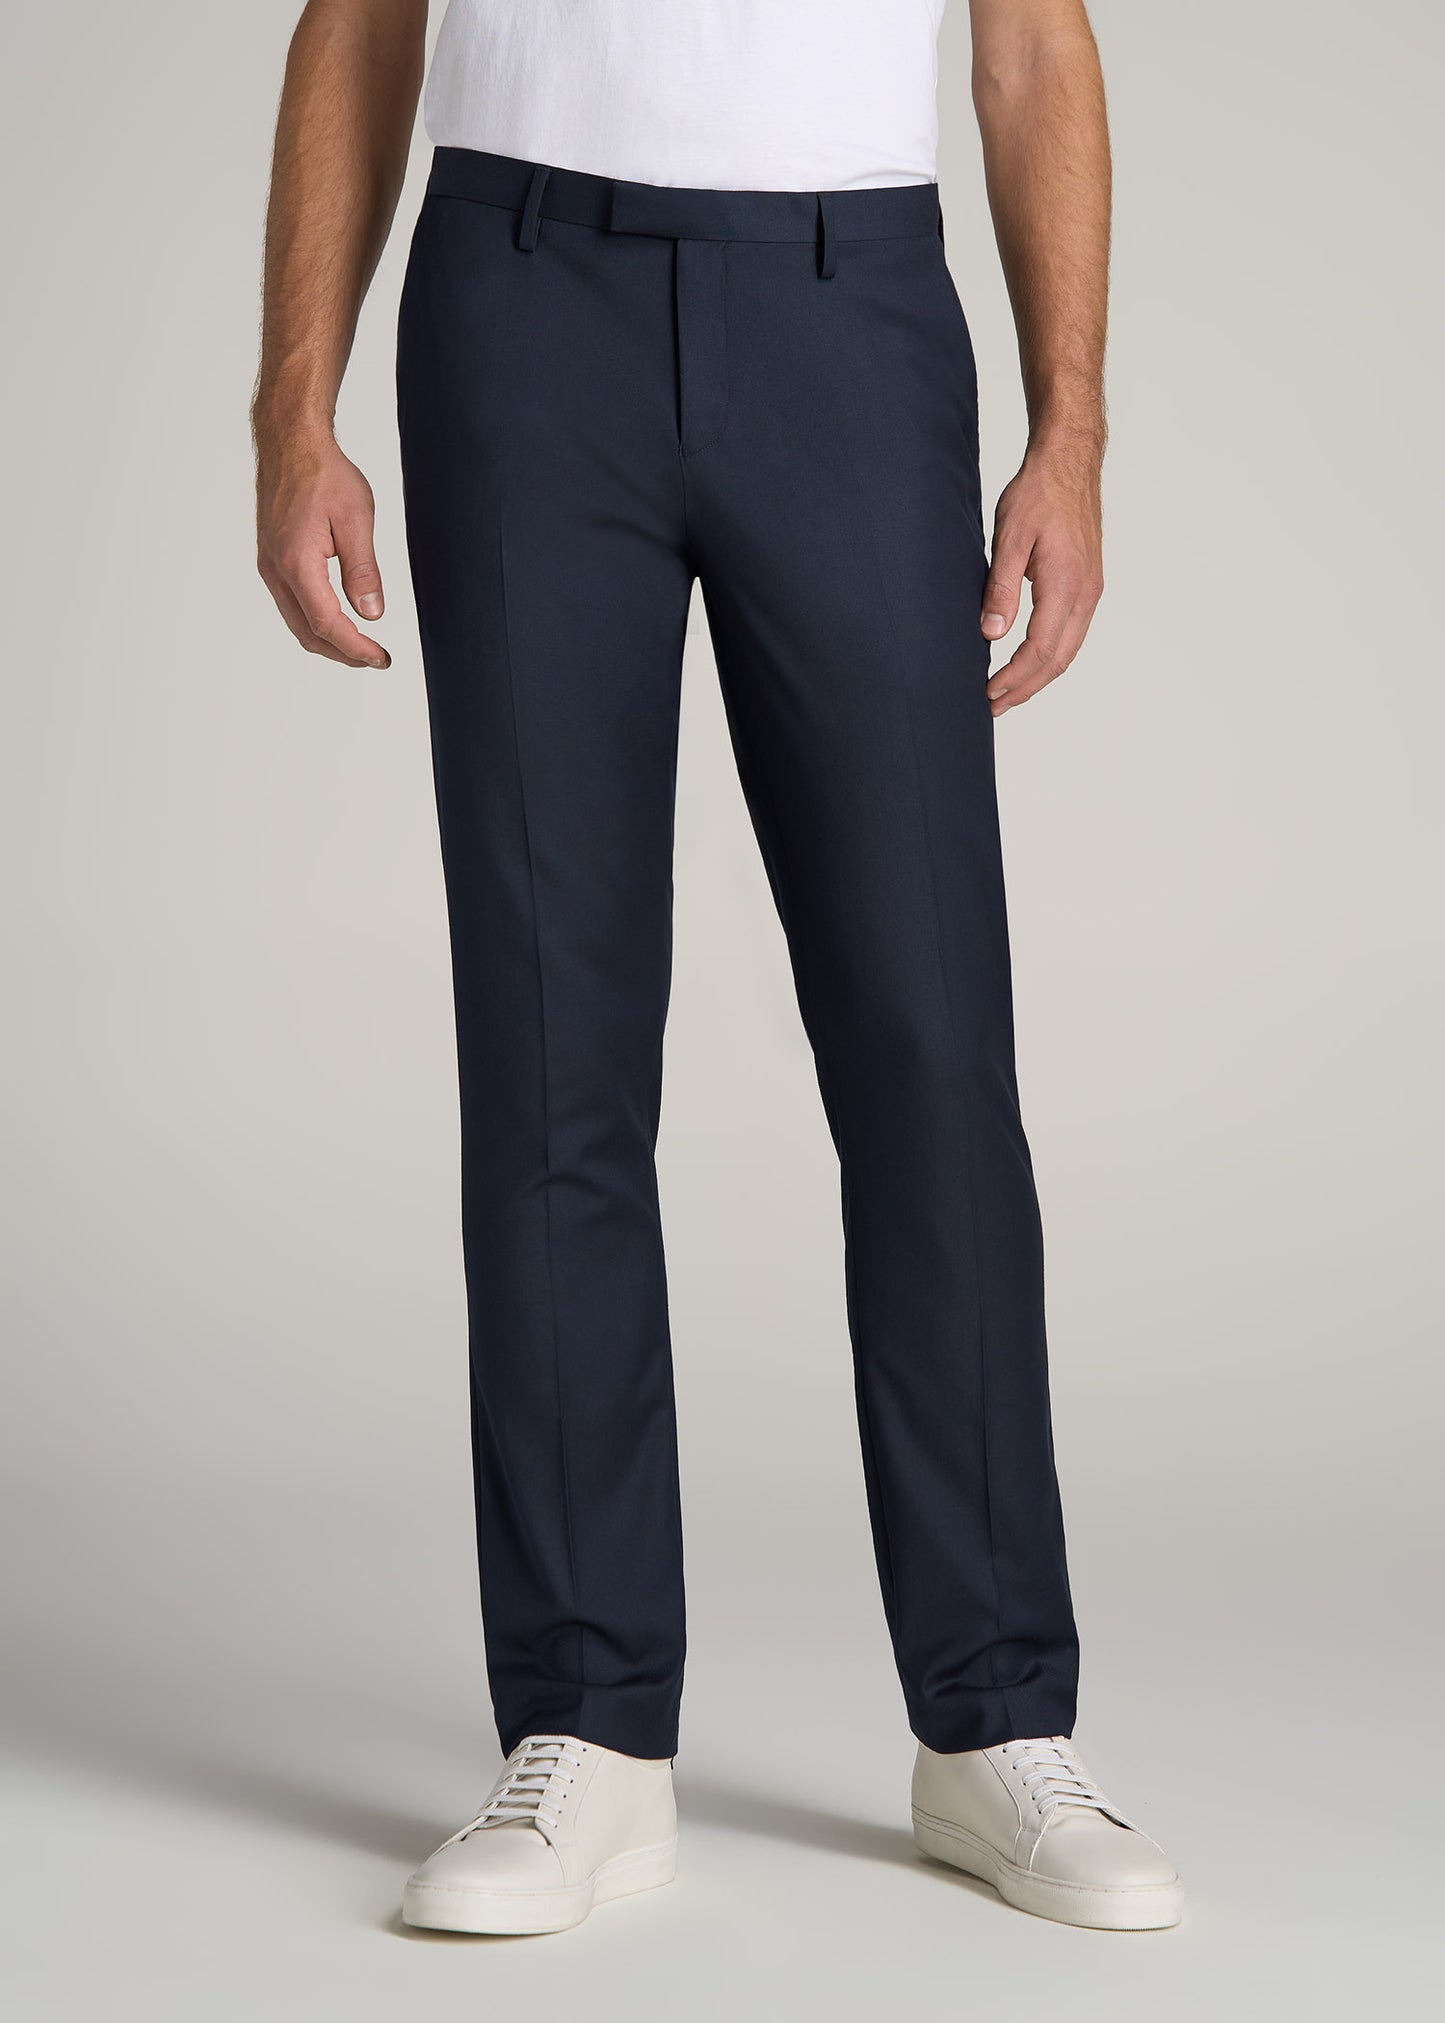 Suit Trousers for Tall Men in True Navy